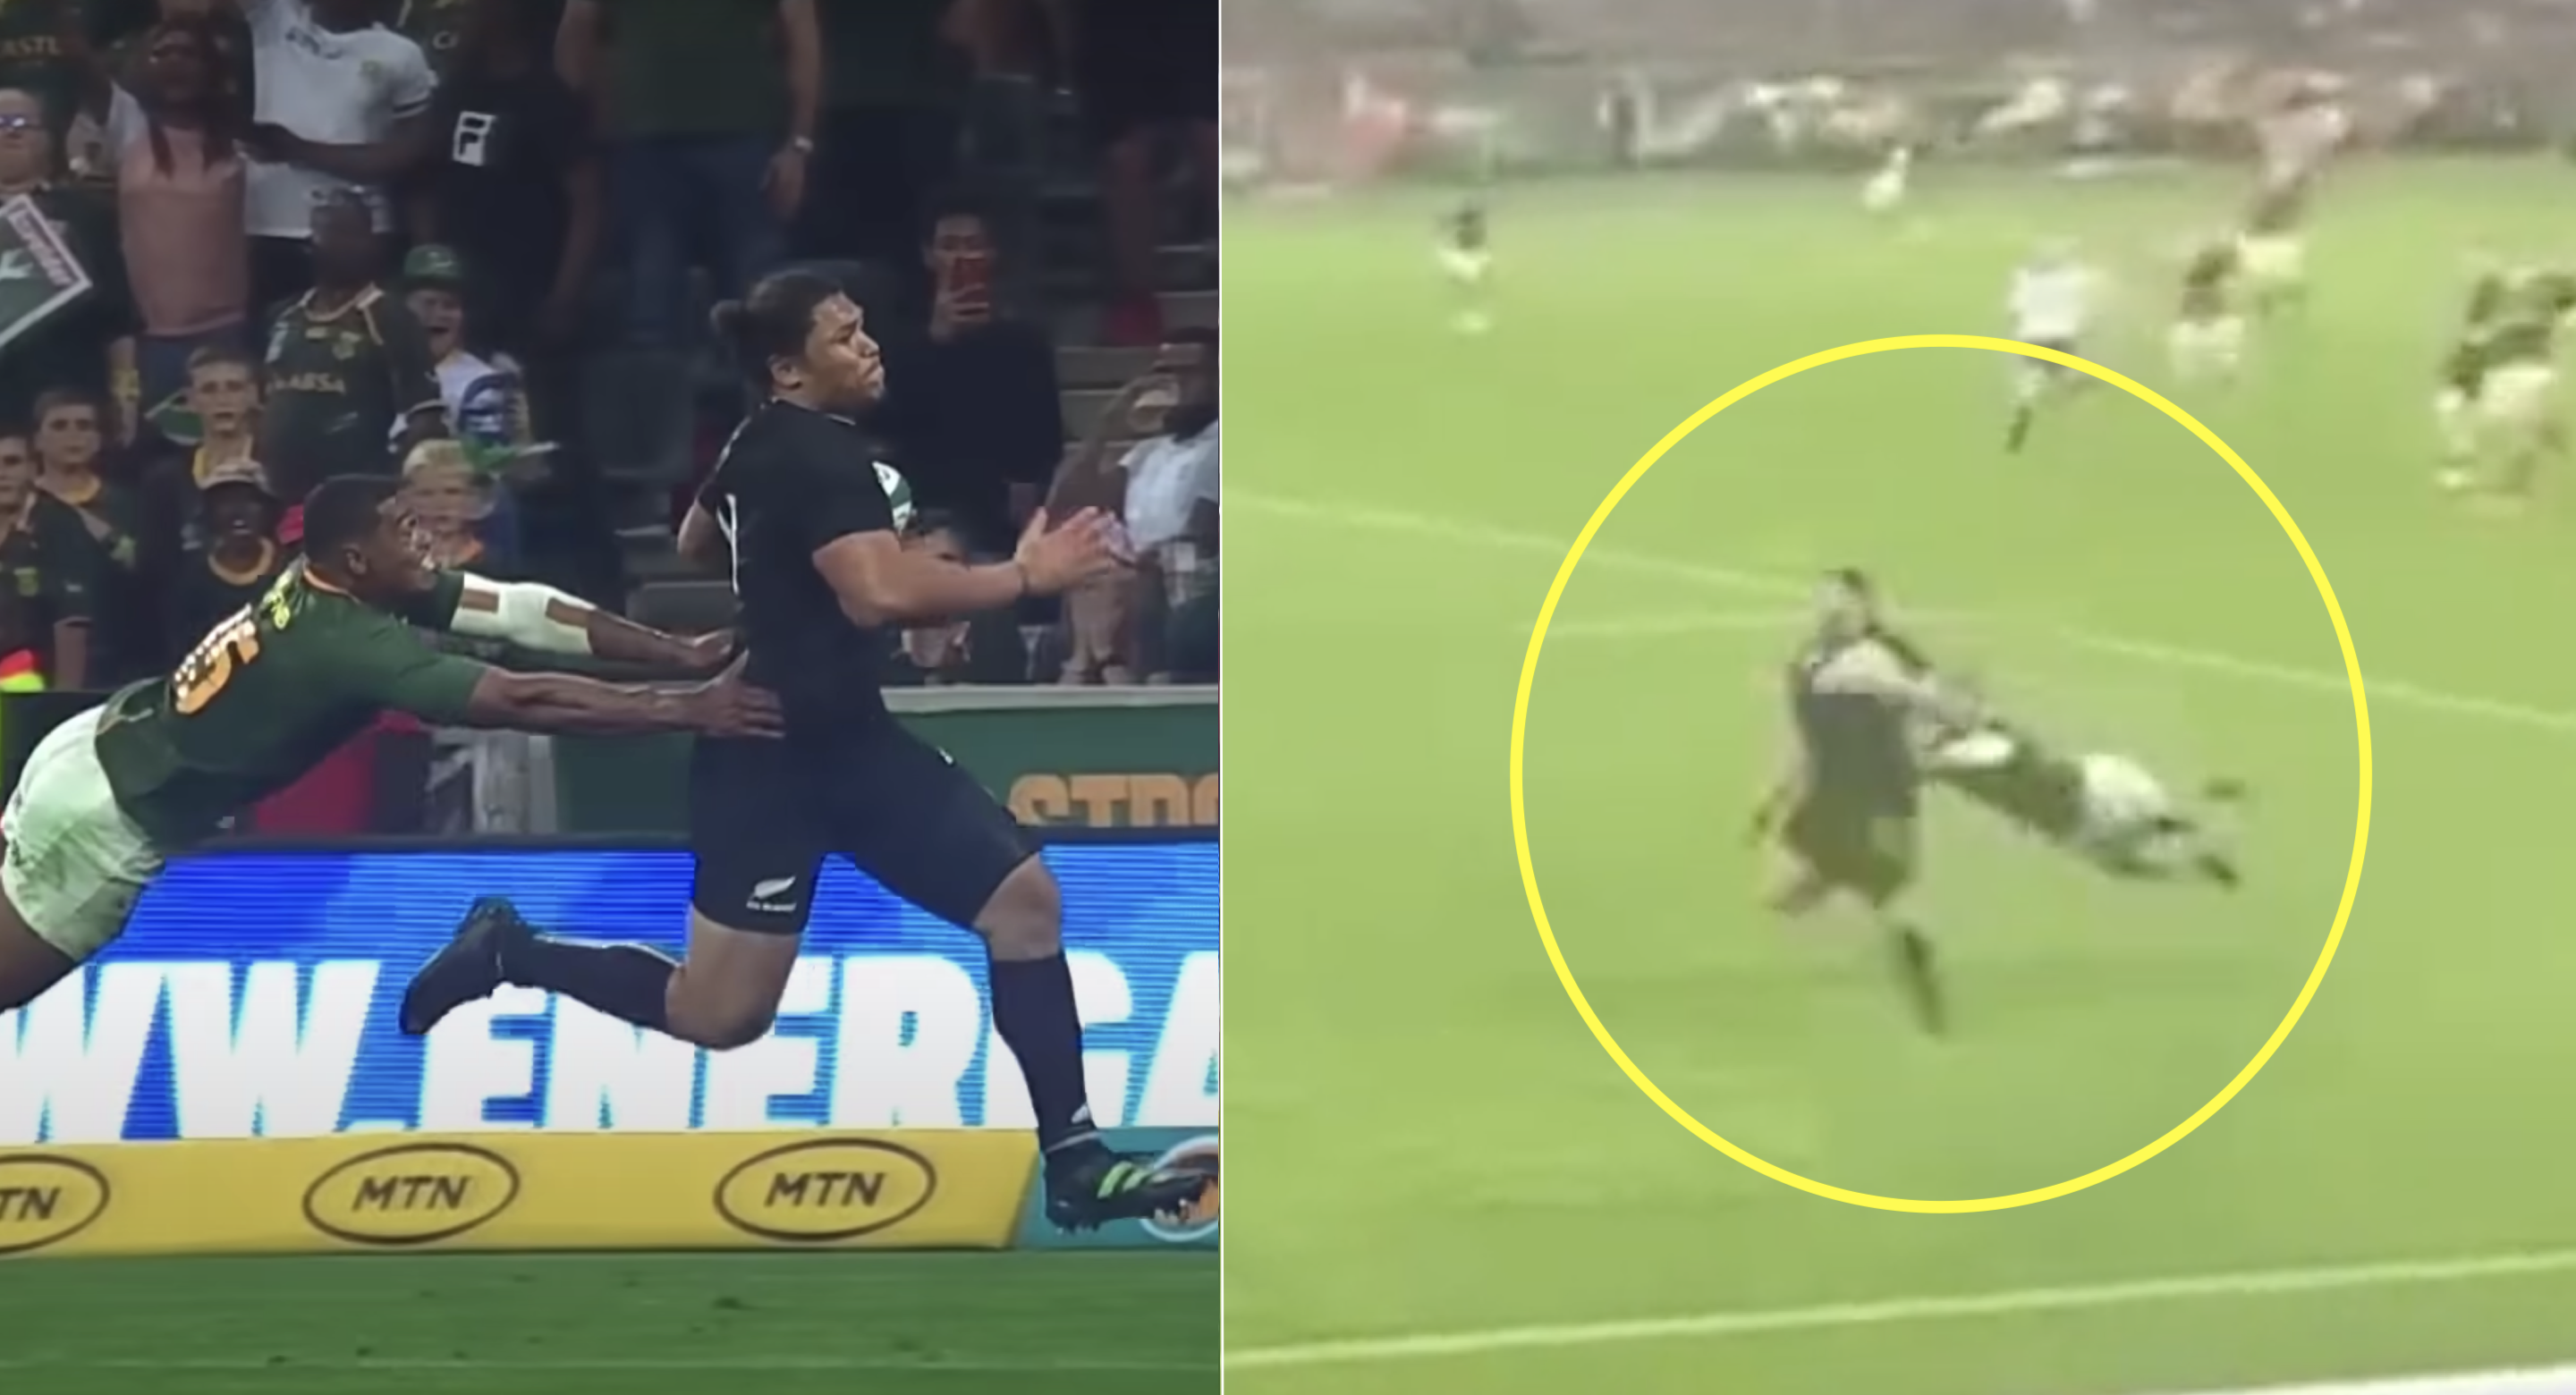 New angle released of Damian Willemse's epic try saving tackle against the All Blacks